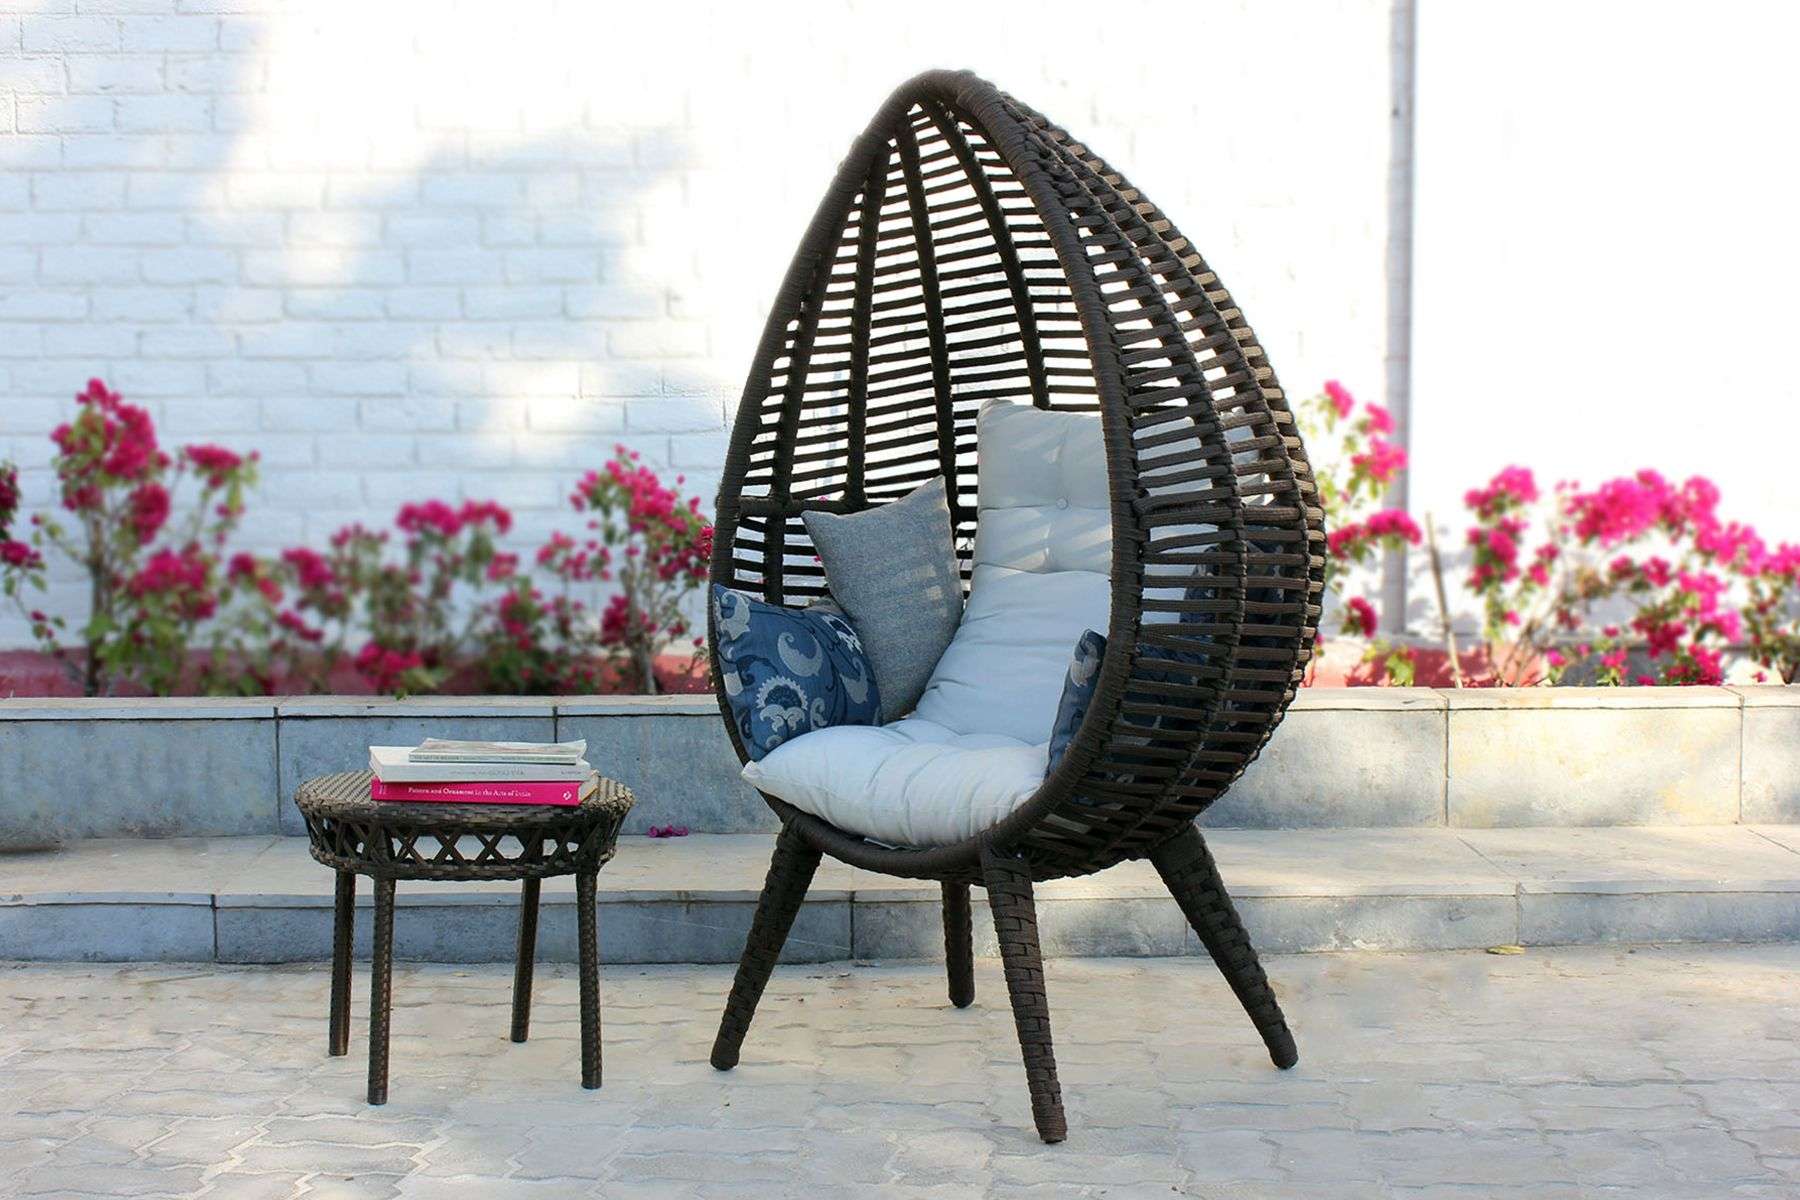 Uron Outdoor Lounge Chair